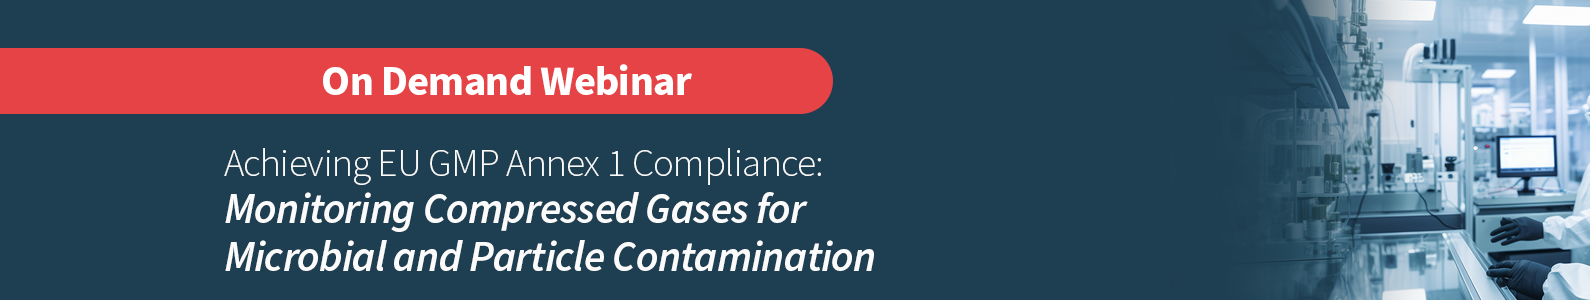 Monitoring compressed gases for microbial and particle contamination on demand webinar banner